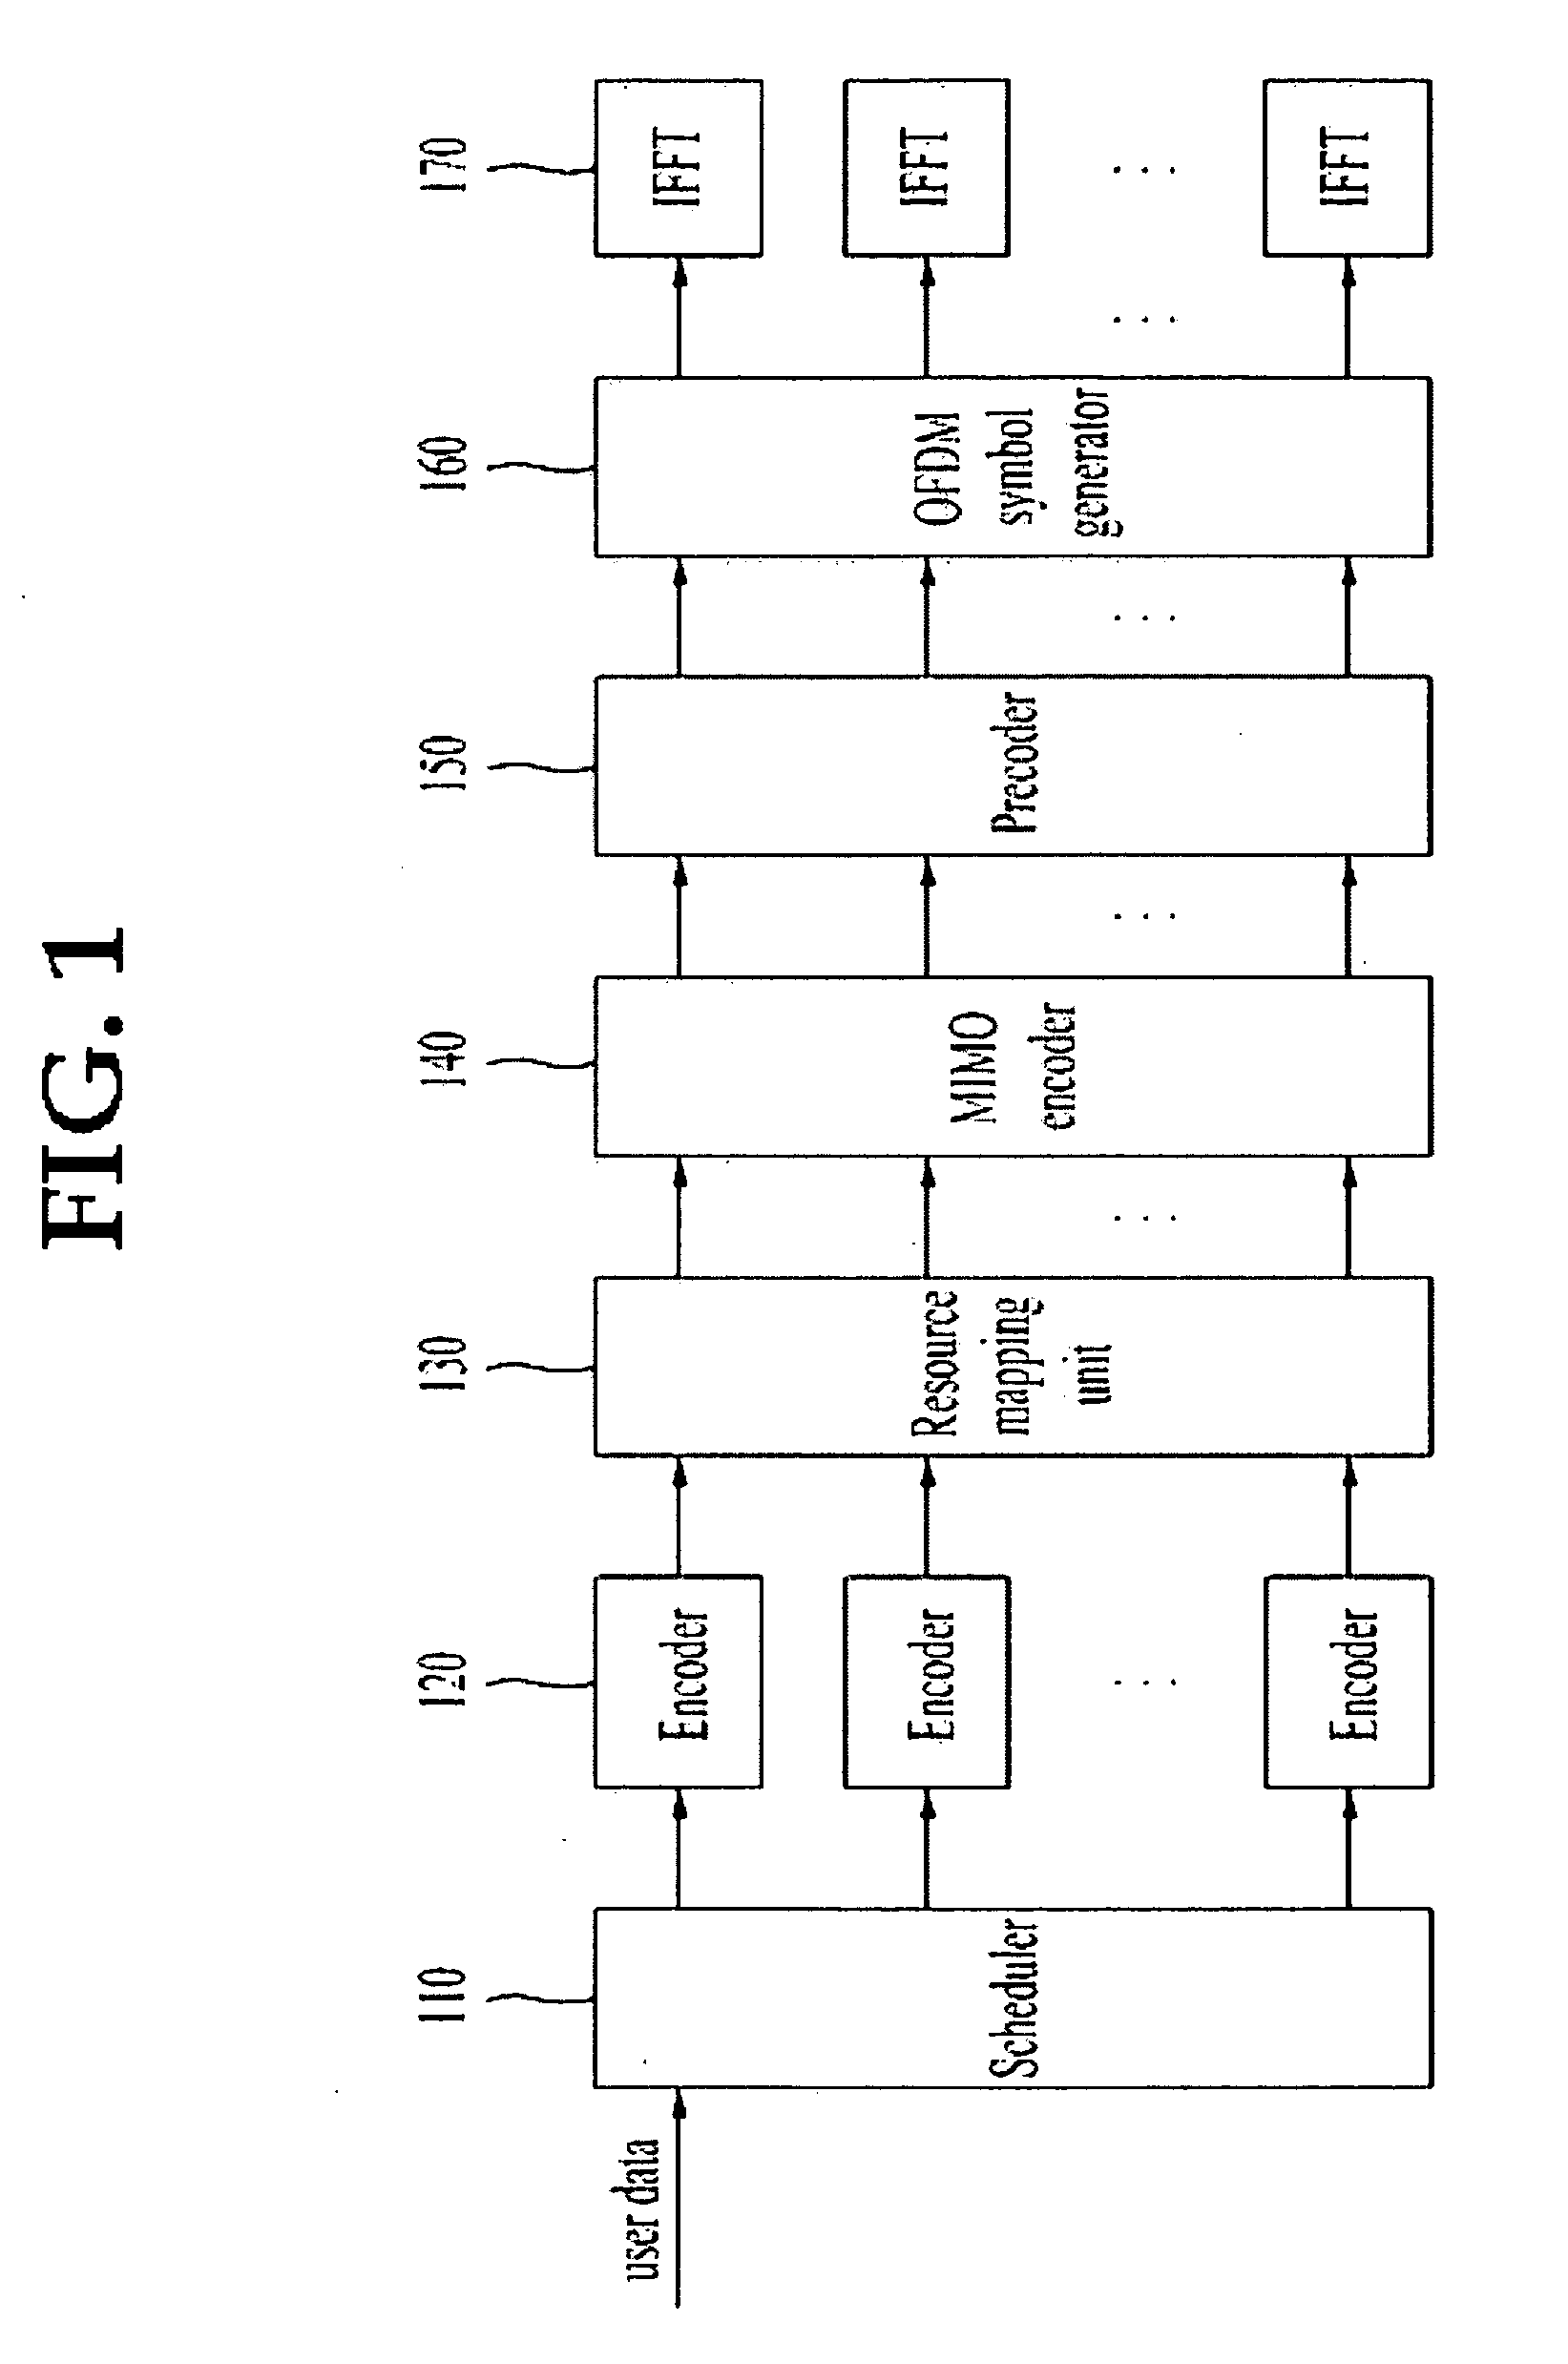 Method of controlling in a wireless communication system having multiple antennas